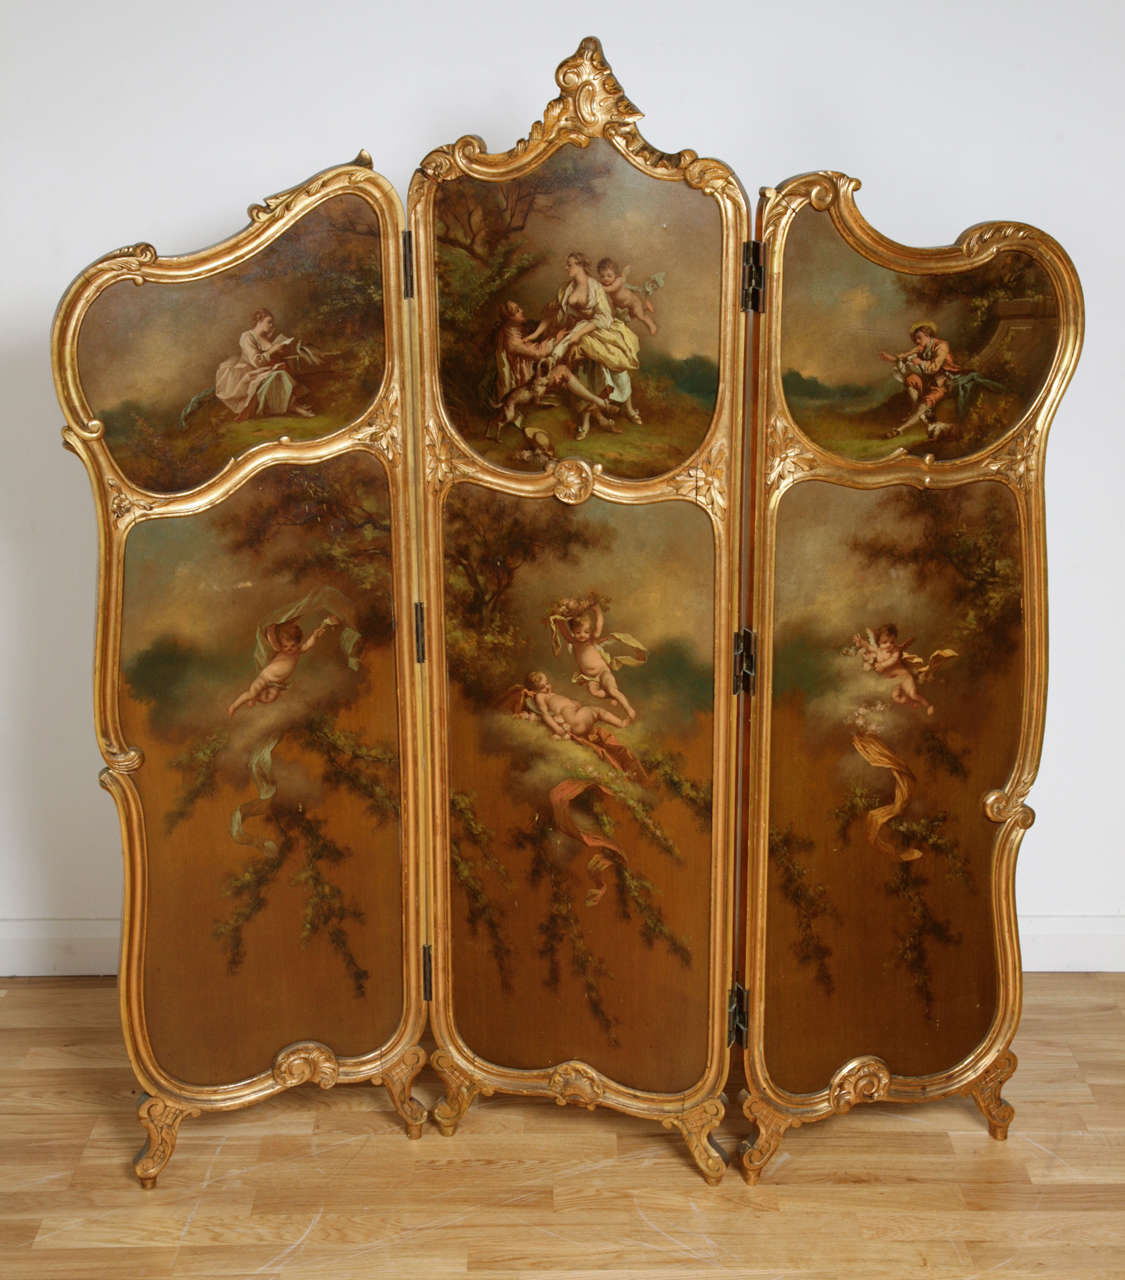 Painted to the front and rear with outdoor scenes of nature, with courting couples and winged cherubs, in the typical Rococo style.